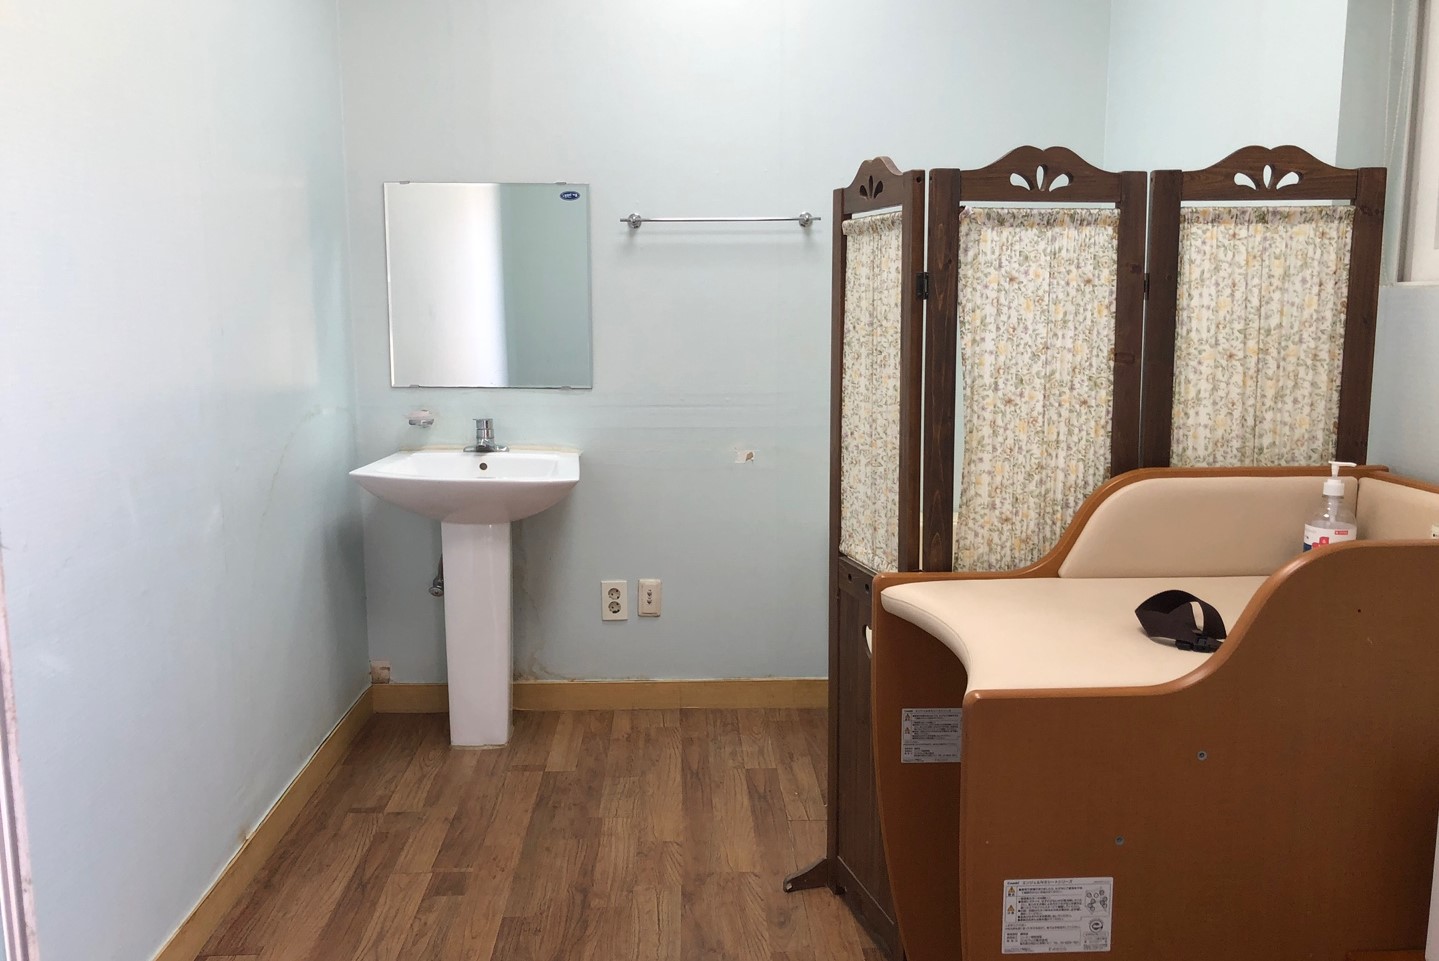 Lounge for families with babies0 : Nursing room in Gyeongbokgung Palace that provides privacy screen
